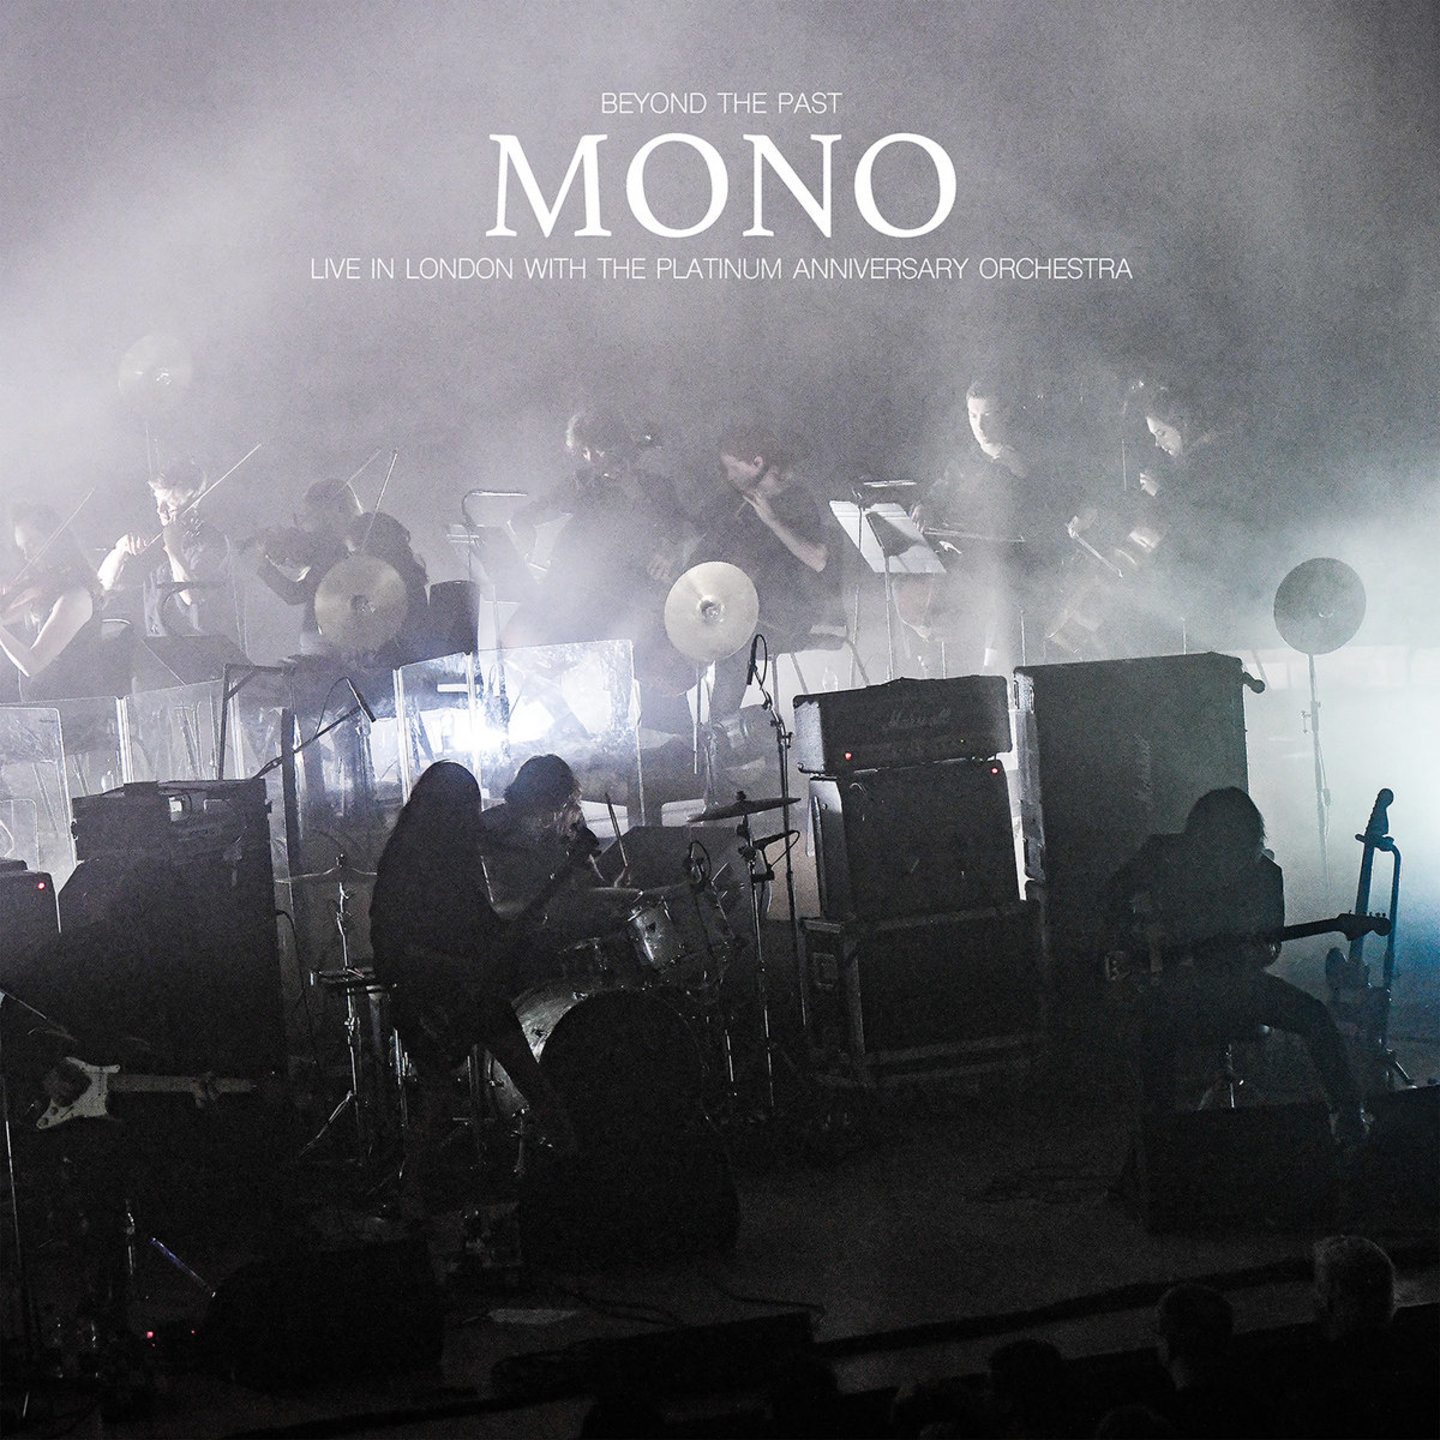 MONO - Beyond The Past: Live in London With The Platinum Anniversary Orchestra 3xLP (Colour vinyl)